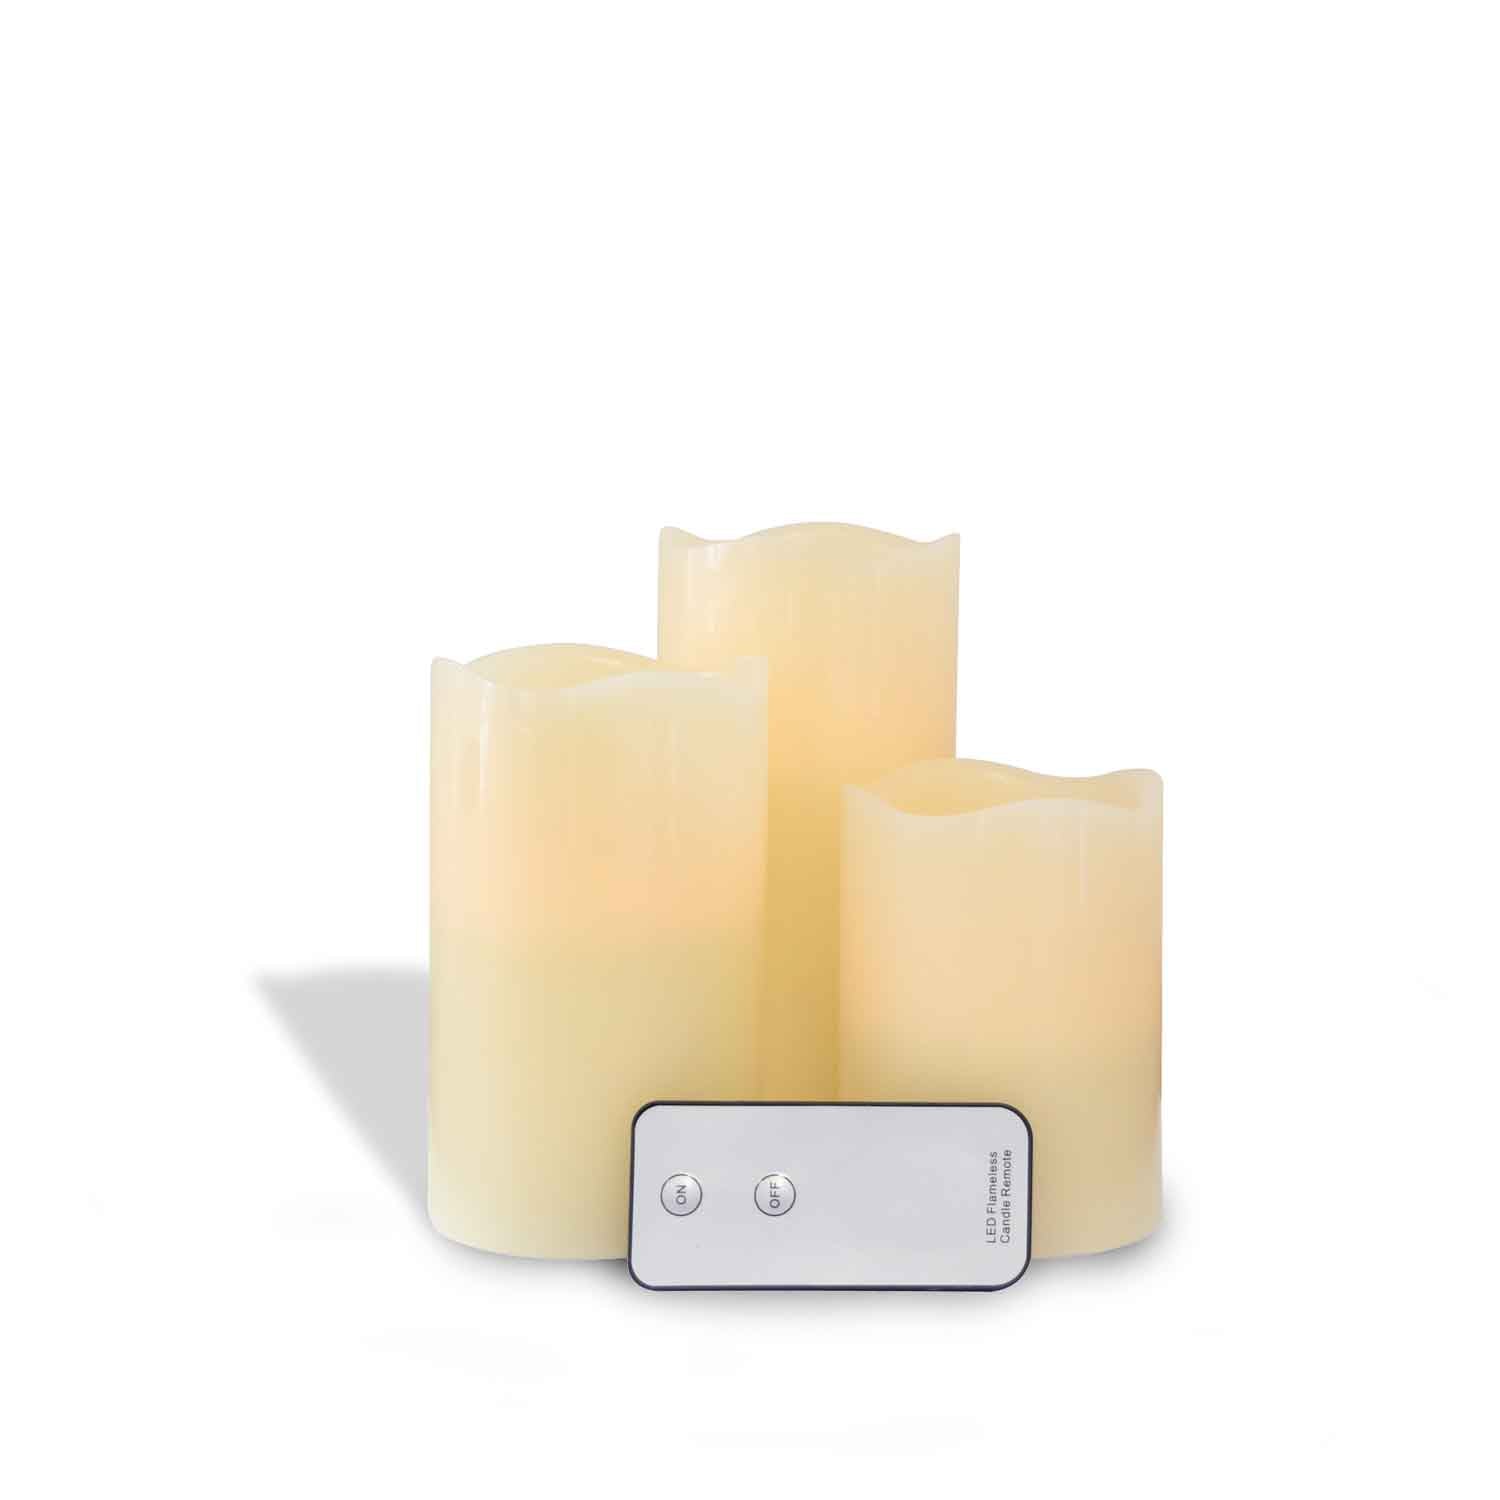 Three Tuscany Candle 3-Piece White LED Flameless Candle Sets with remote control on a white background.